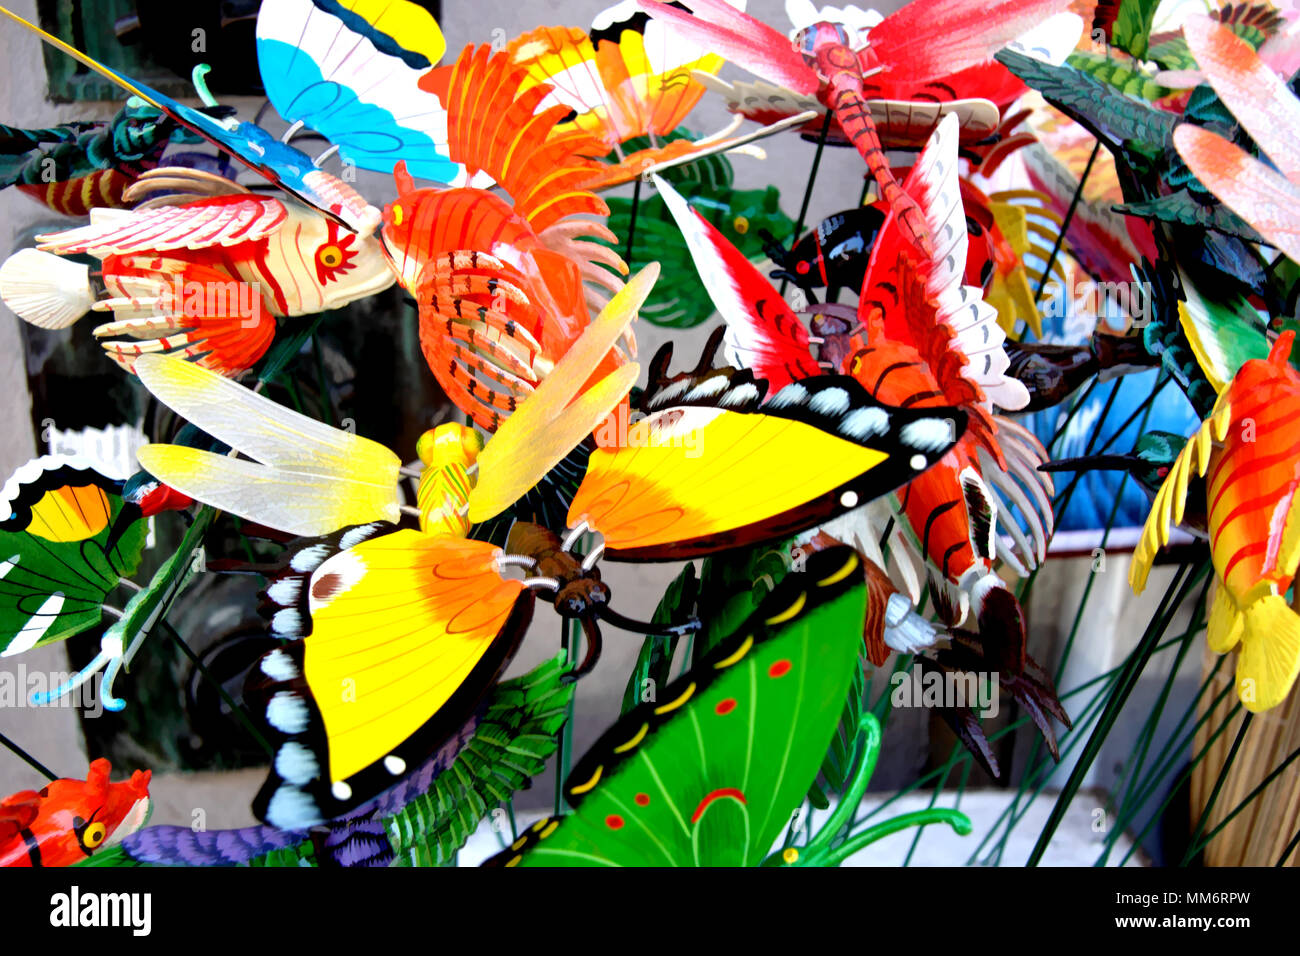 Souvenir butterflies and fish outside of a tourist shop on Grant Avenue in San Francisco's Chinatown. Image processed with Photoshop filters. Stock Photo